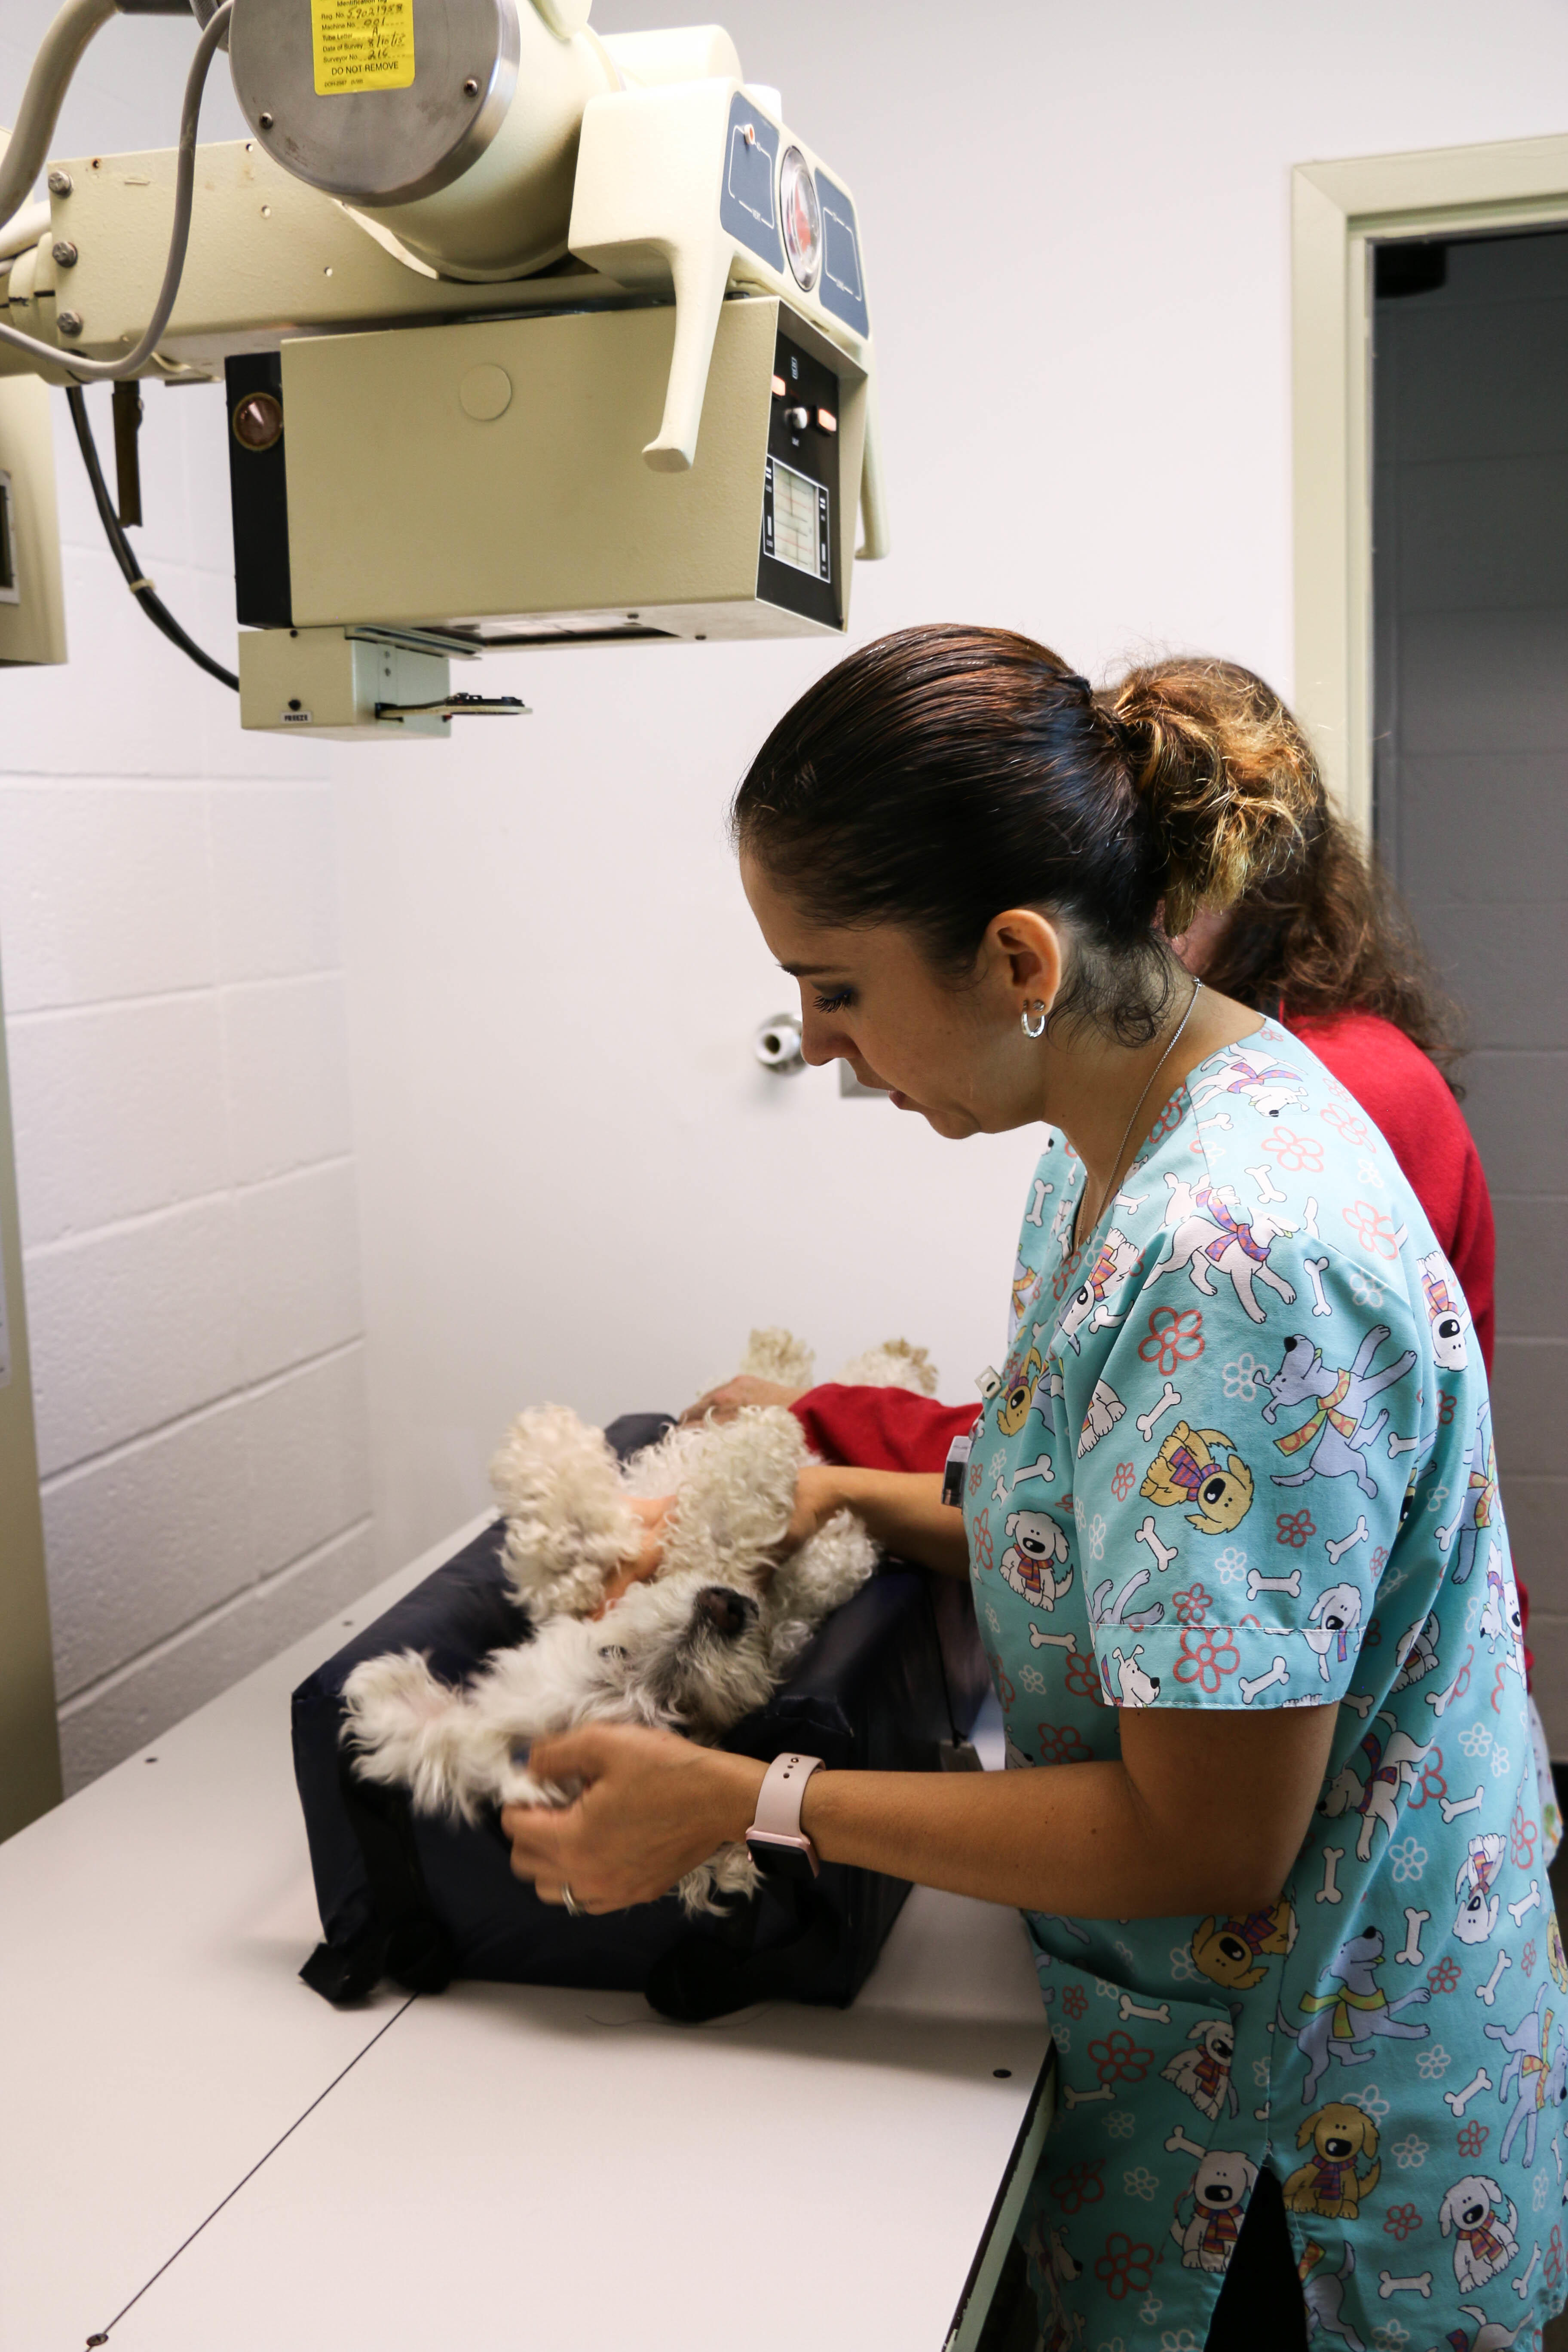 This patient is on his best behavior for an x-ray. Pound Ridge Veterinary Center is equipped with digital radiography, allowing our veterinarians to extract clear and precise images from each x-ray.